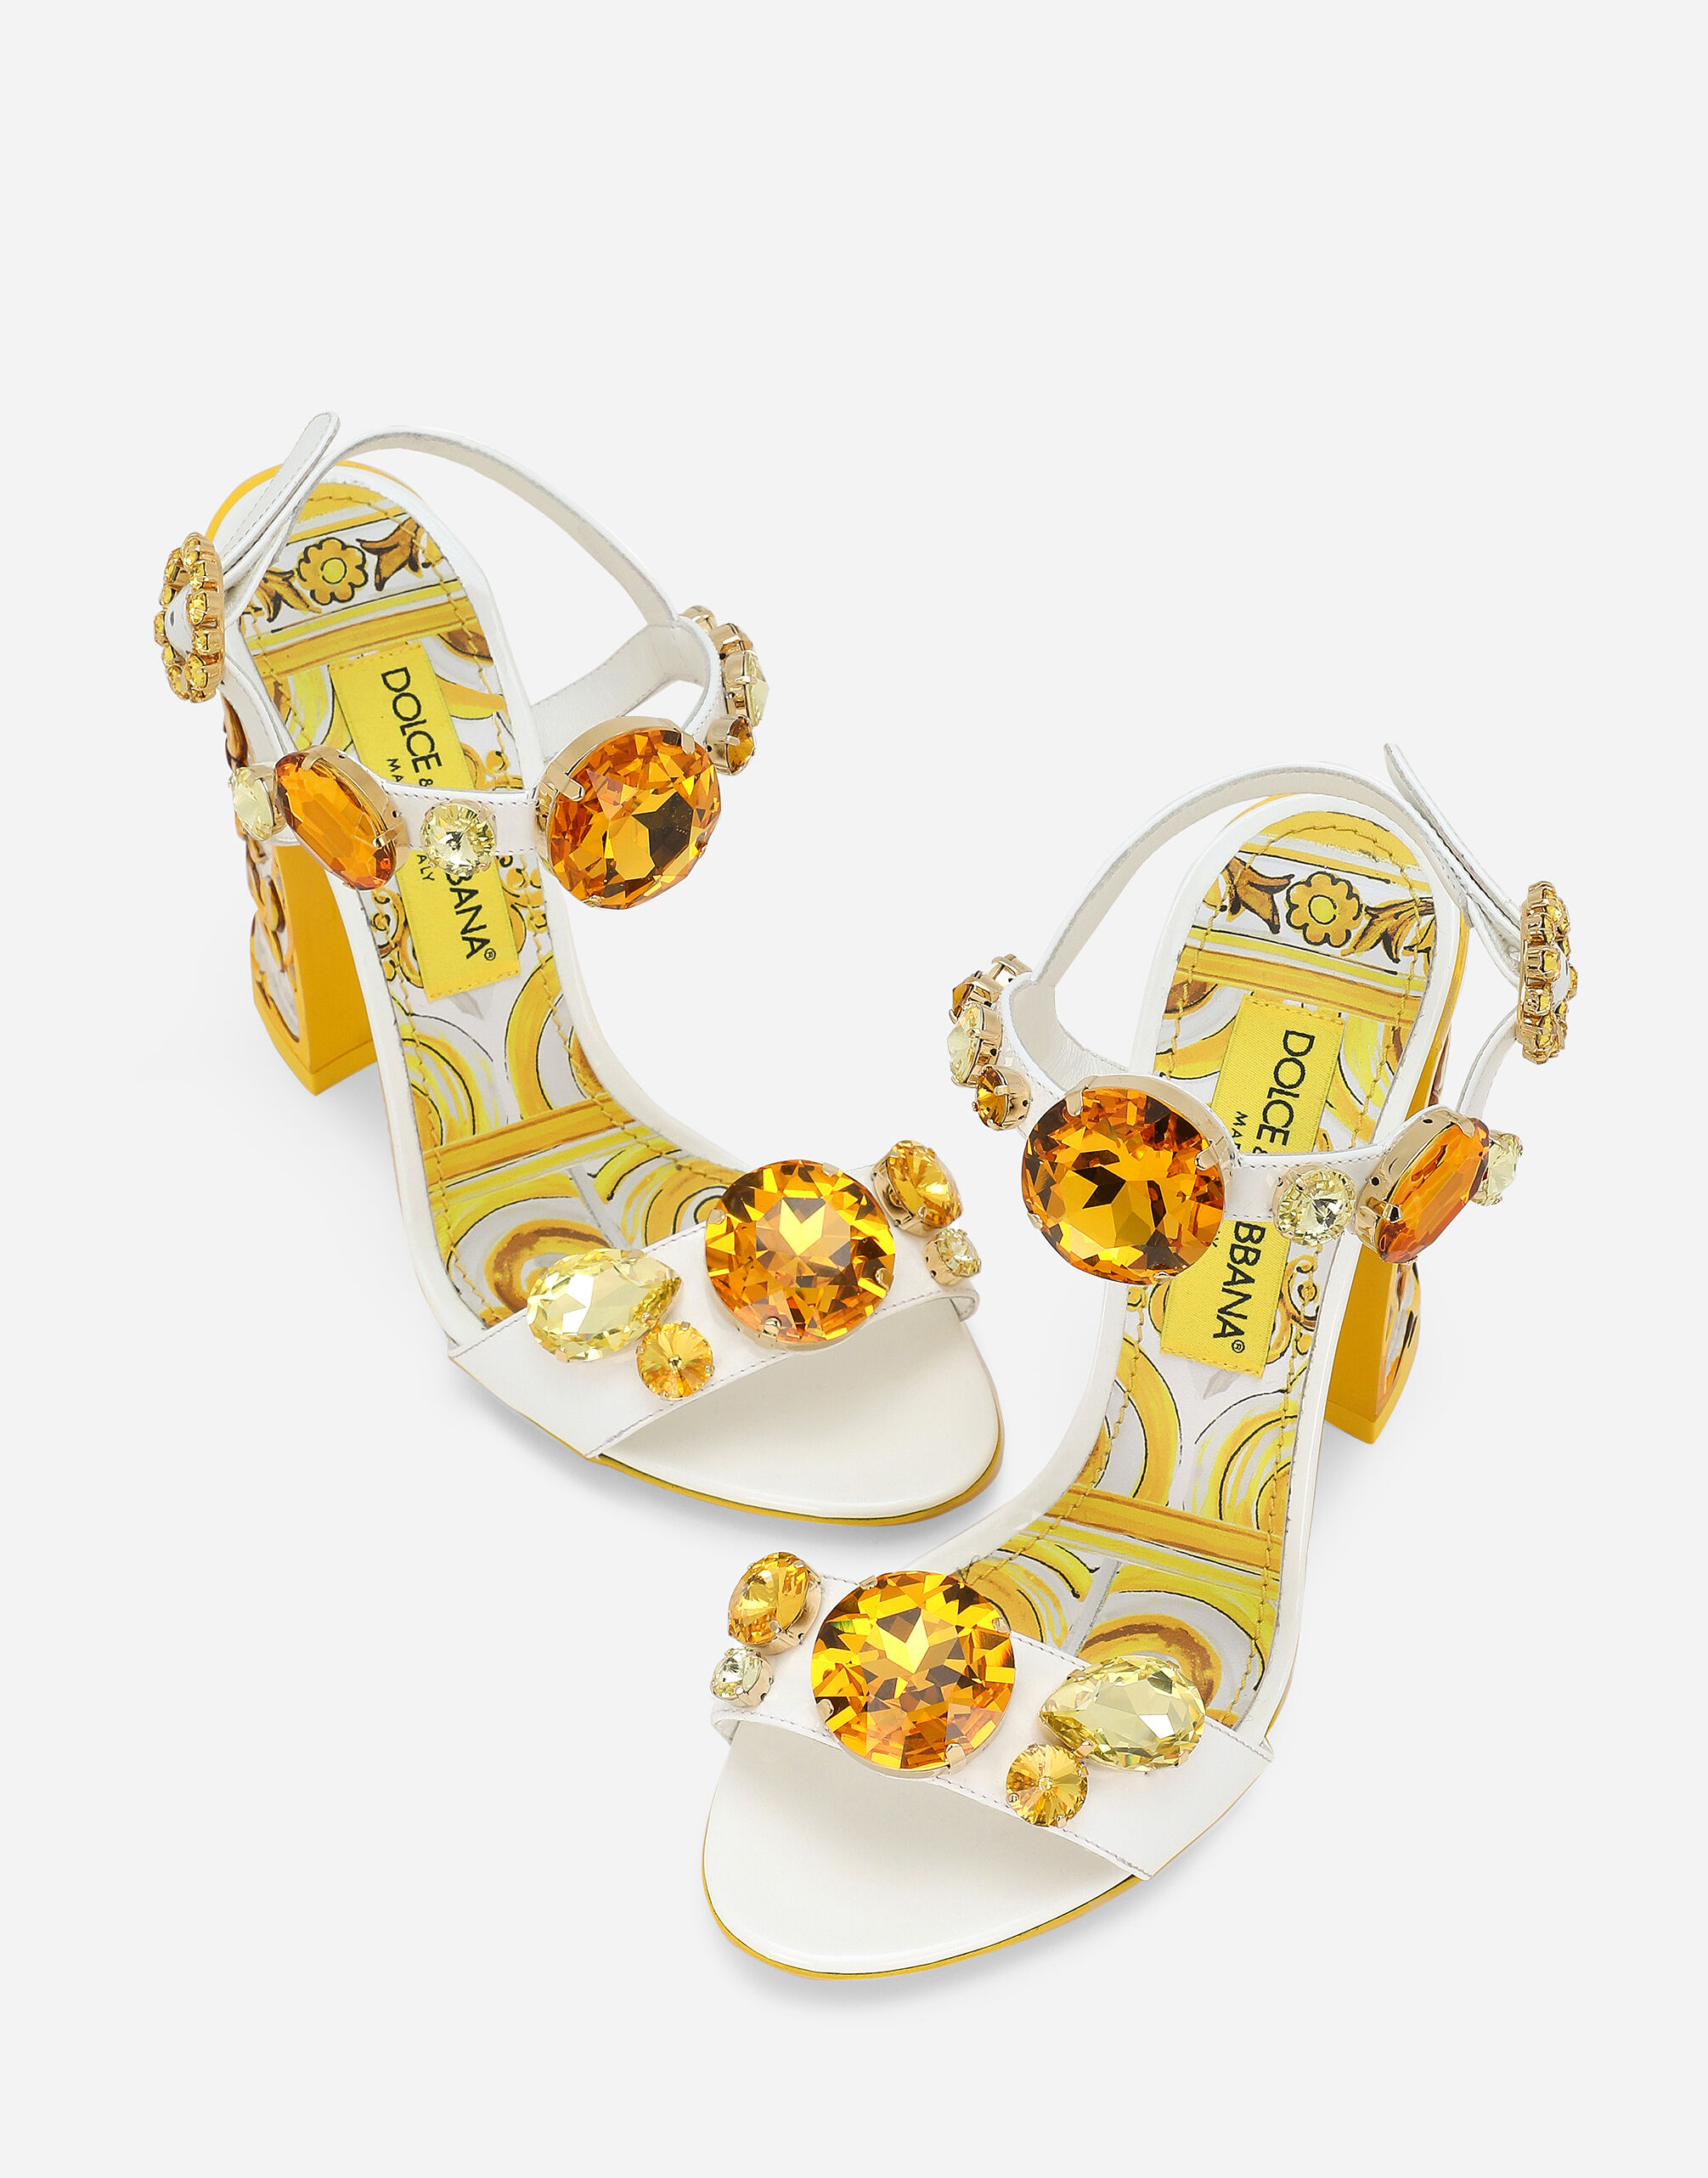 Patent leather sandals with stone embellishment and painted heel